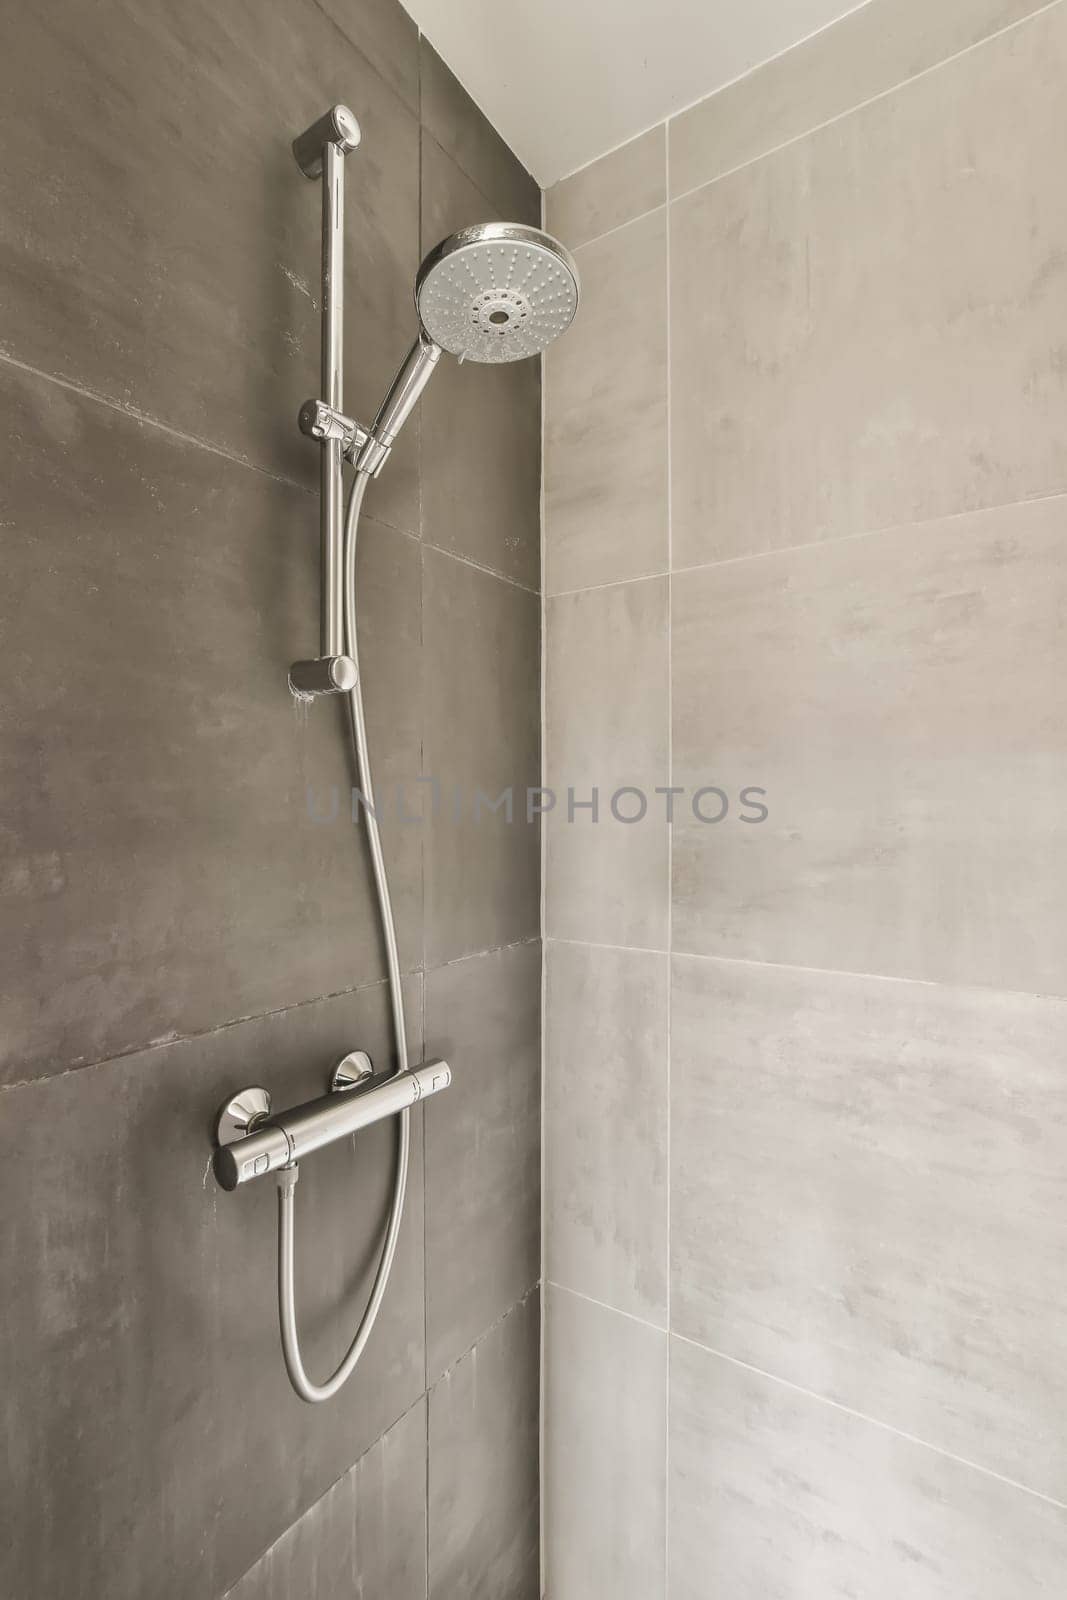 a shower with grey tiles on the wall and white tile flooring in a modern style bathroom interior stock photo